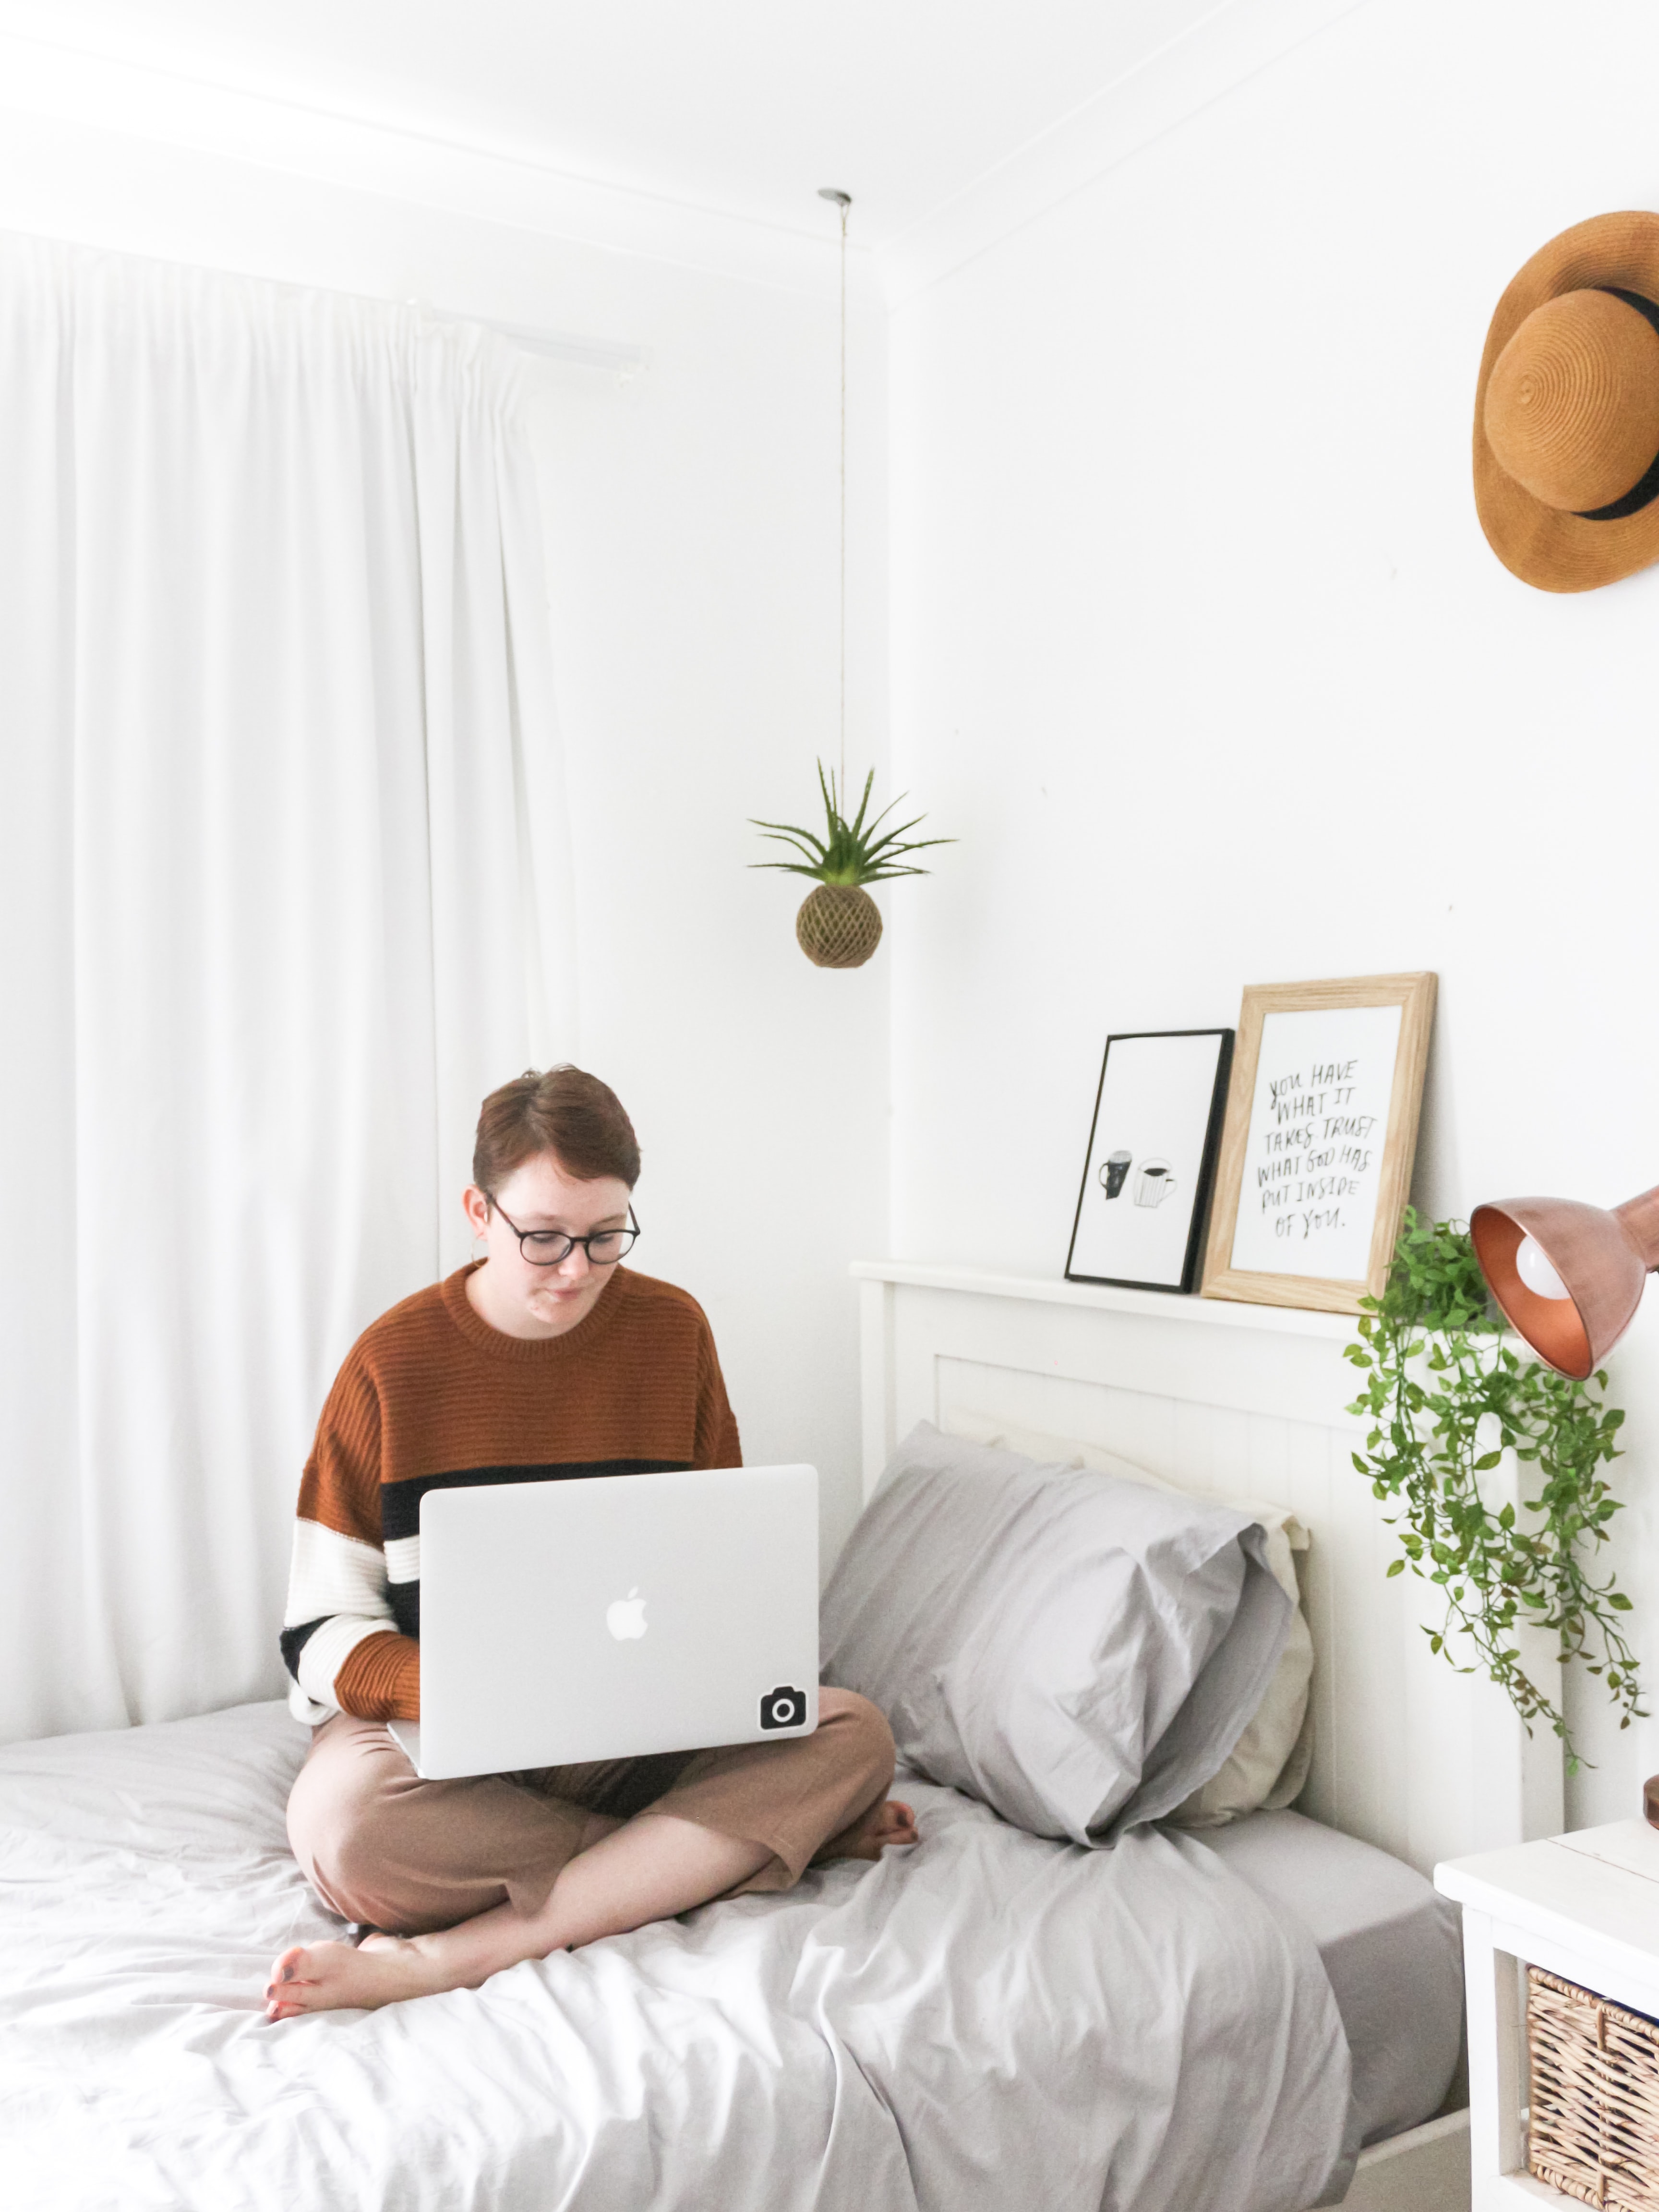 7 Tips to Keep Your Dorm Room Tidy's featured image